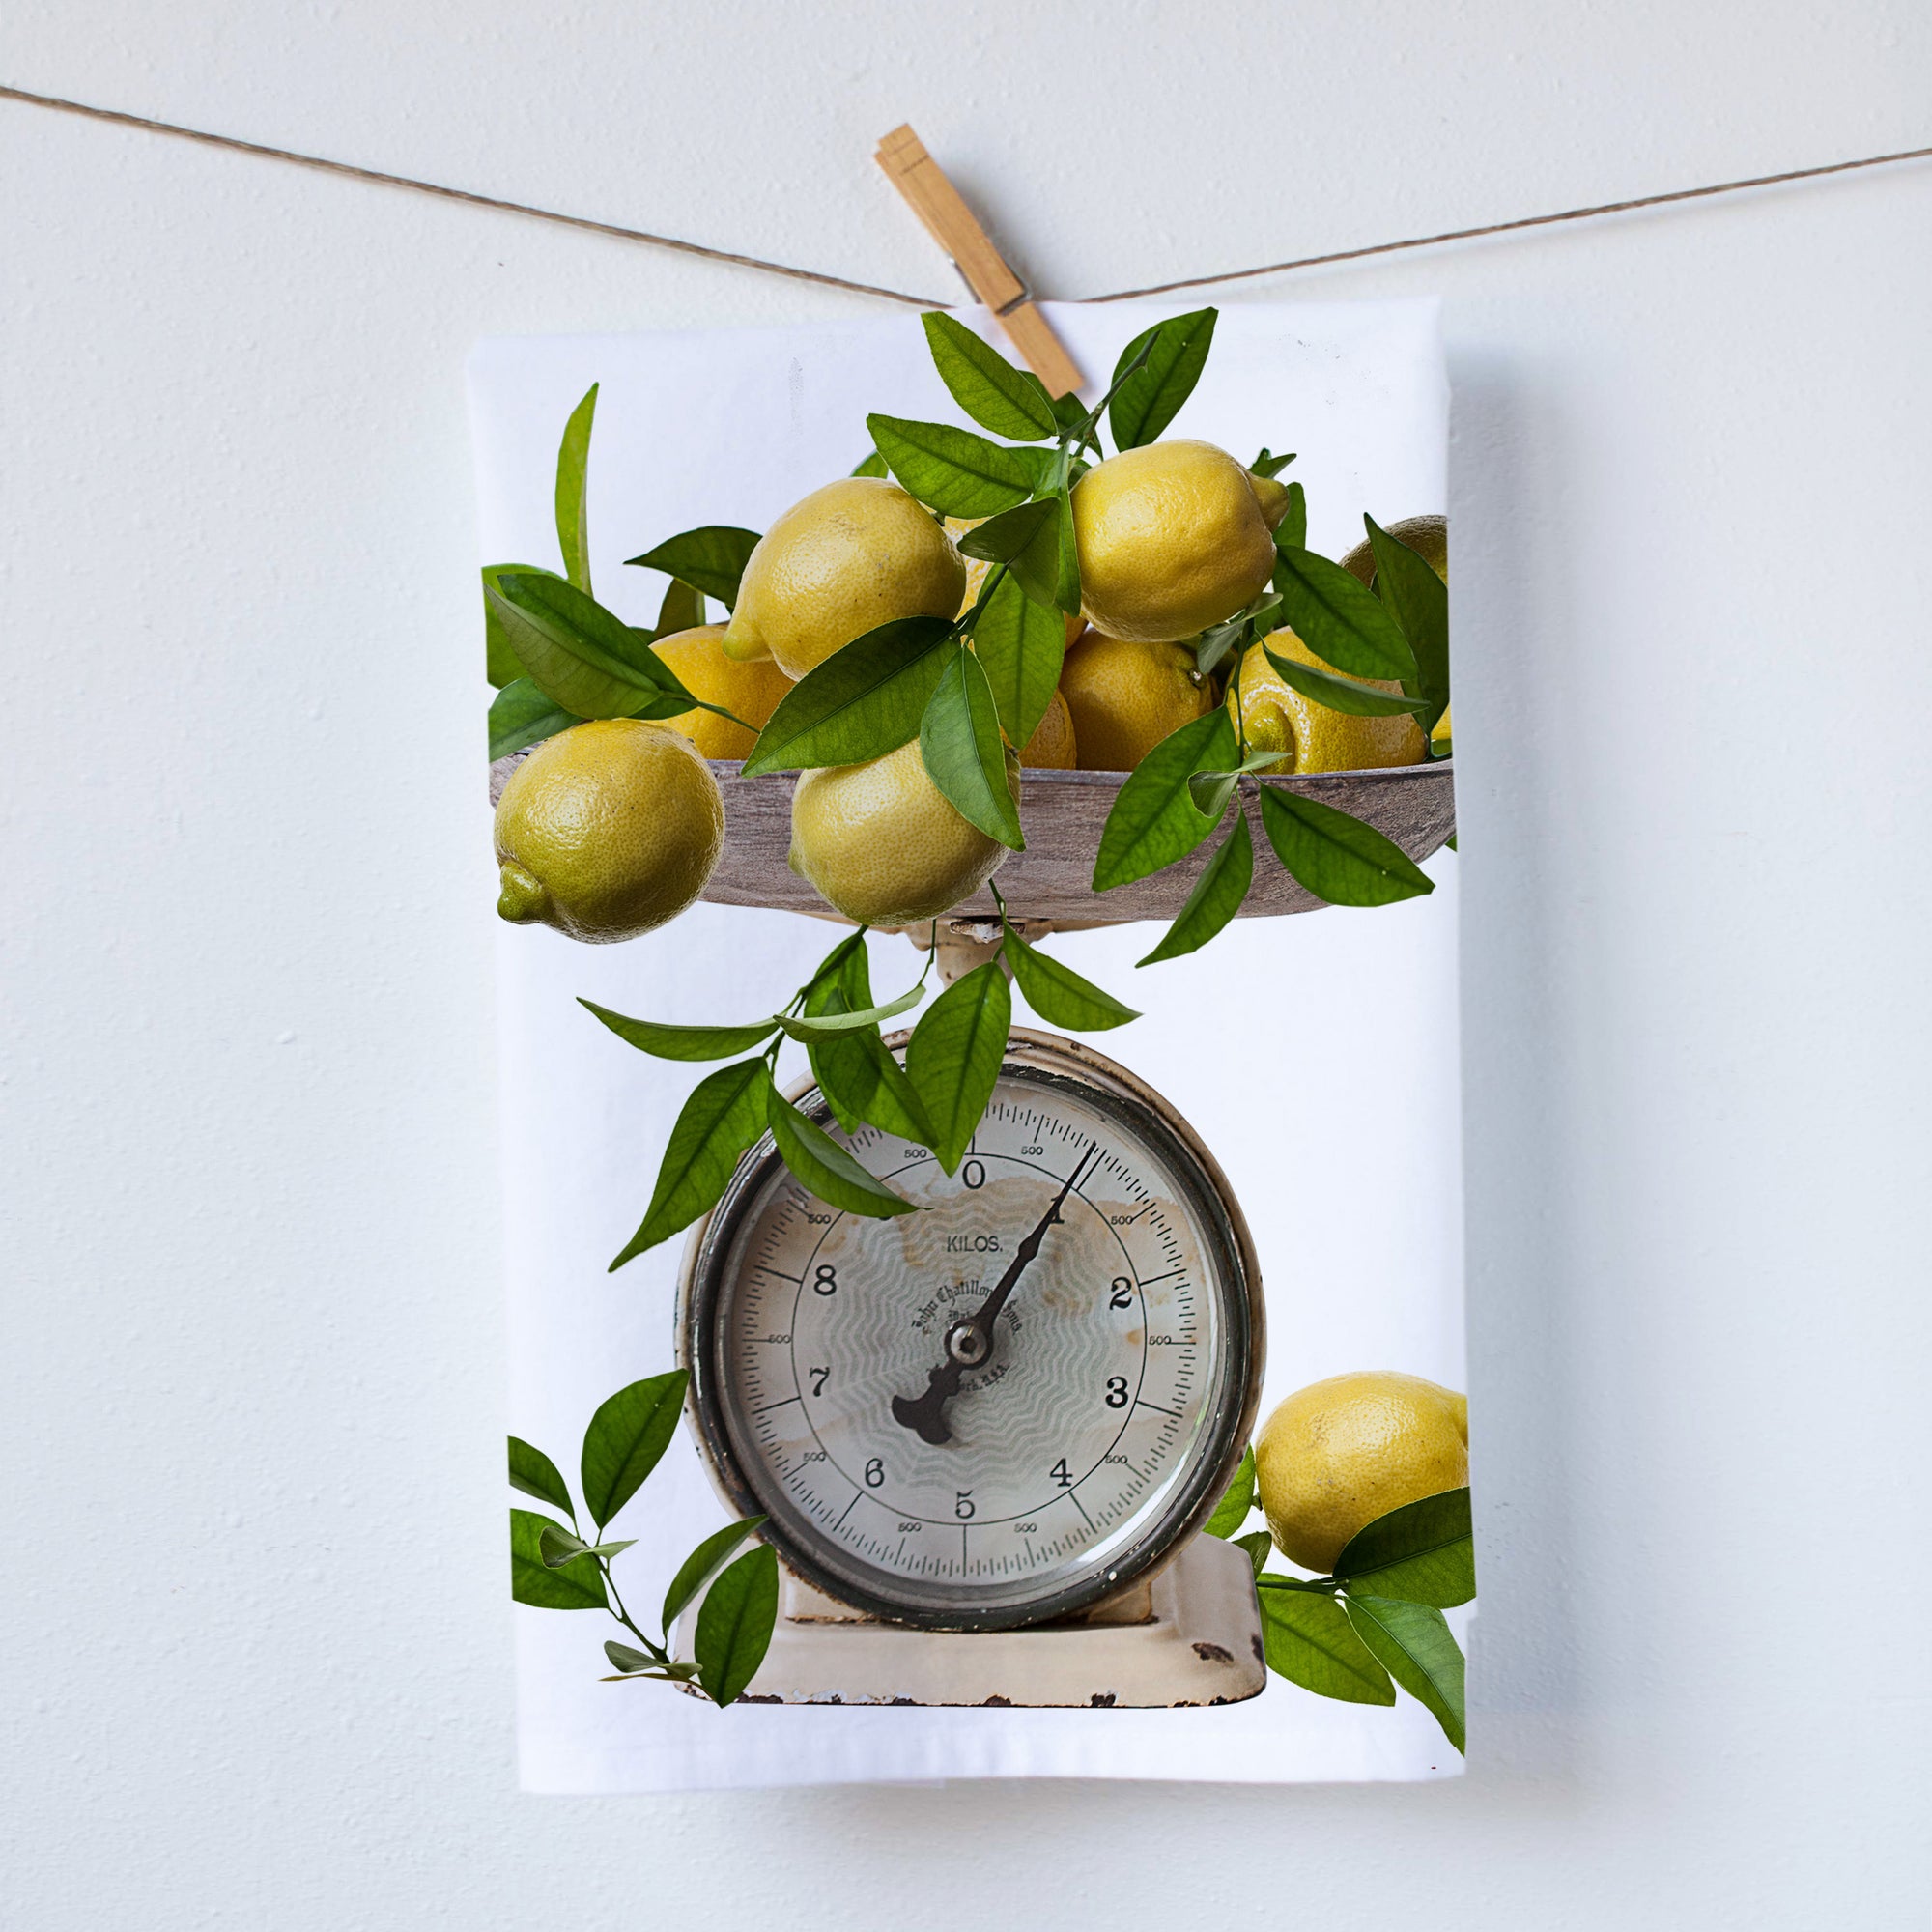 Scale with Lemons